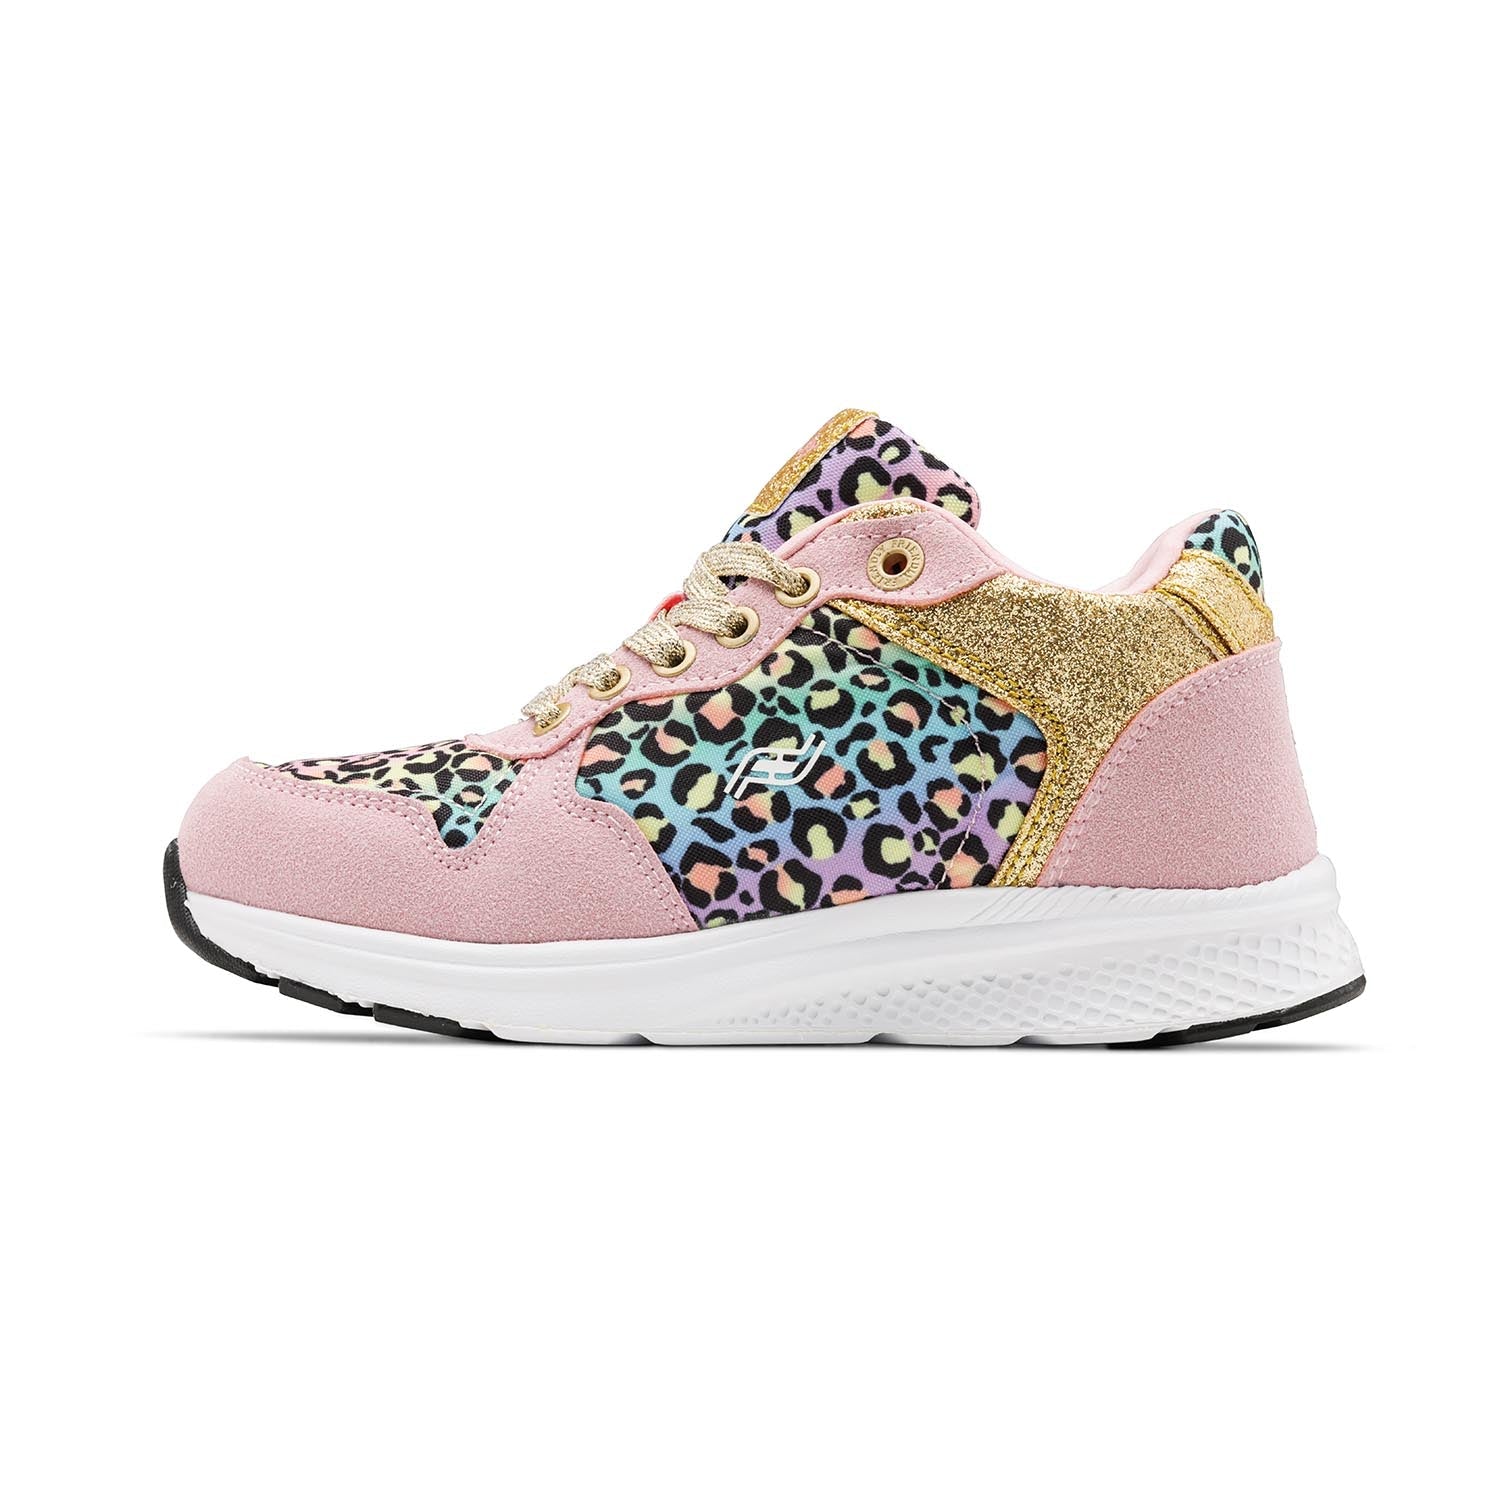 Pink, rainbow leopard, and gold shimmer kids high top shoe with white bottom and rear zipper access.